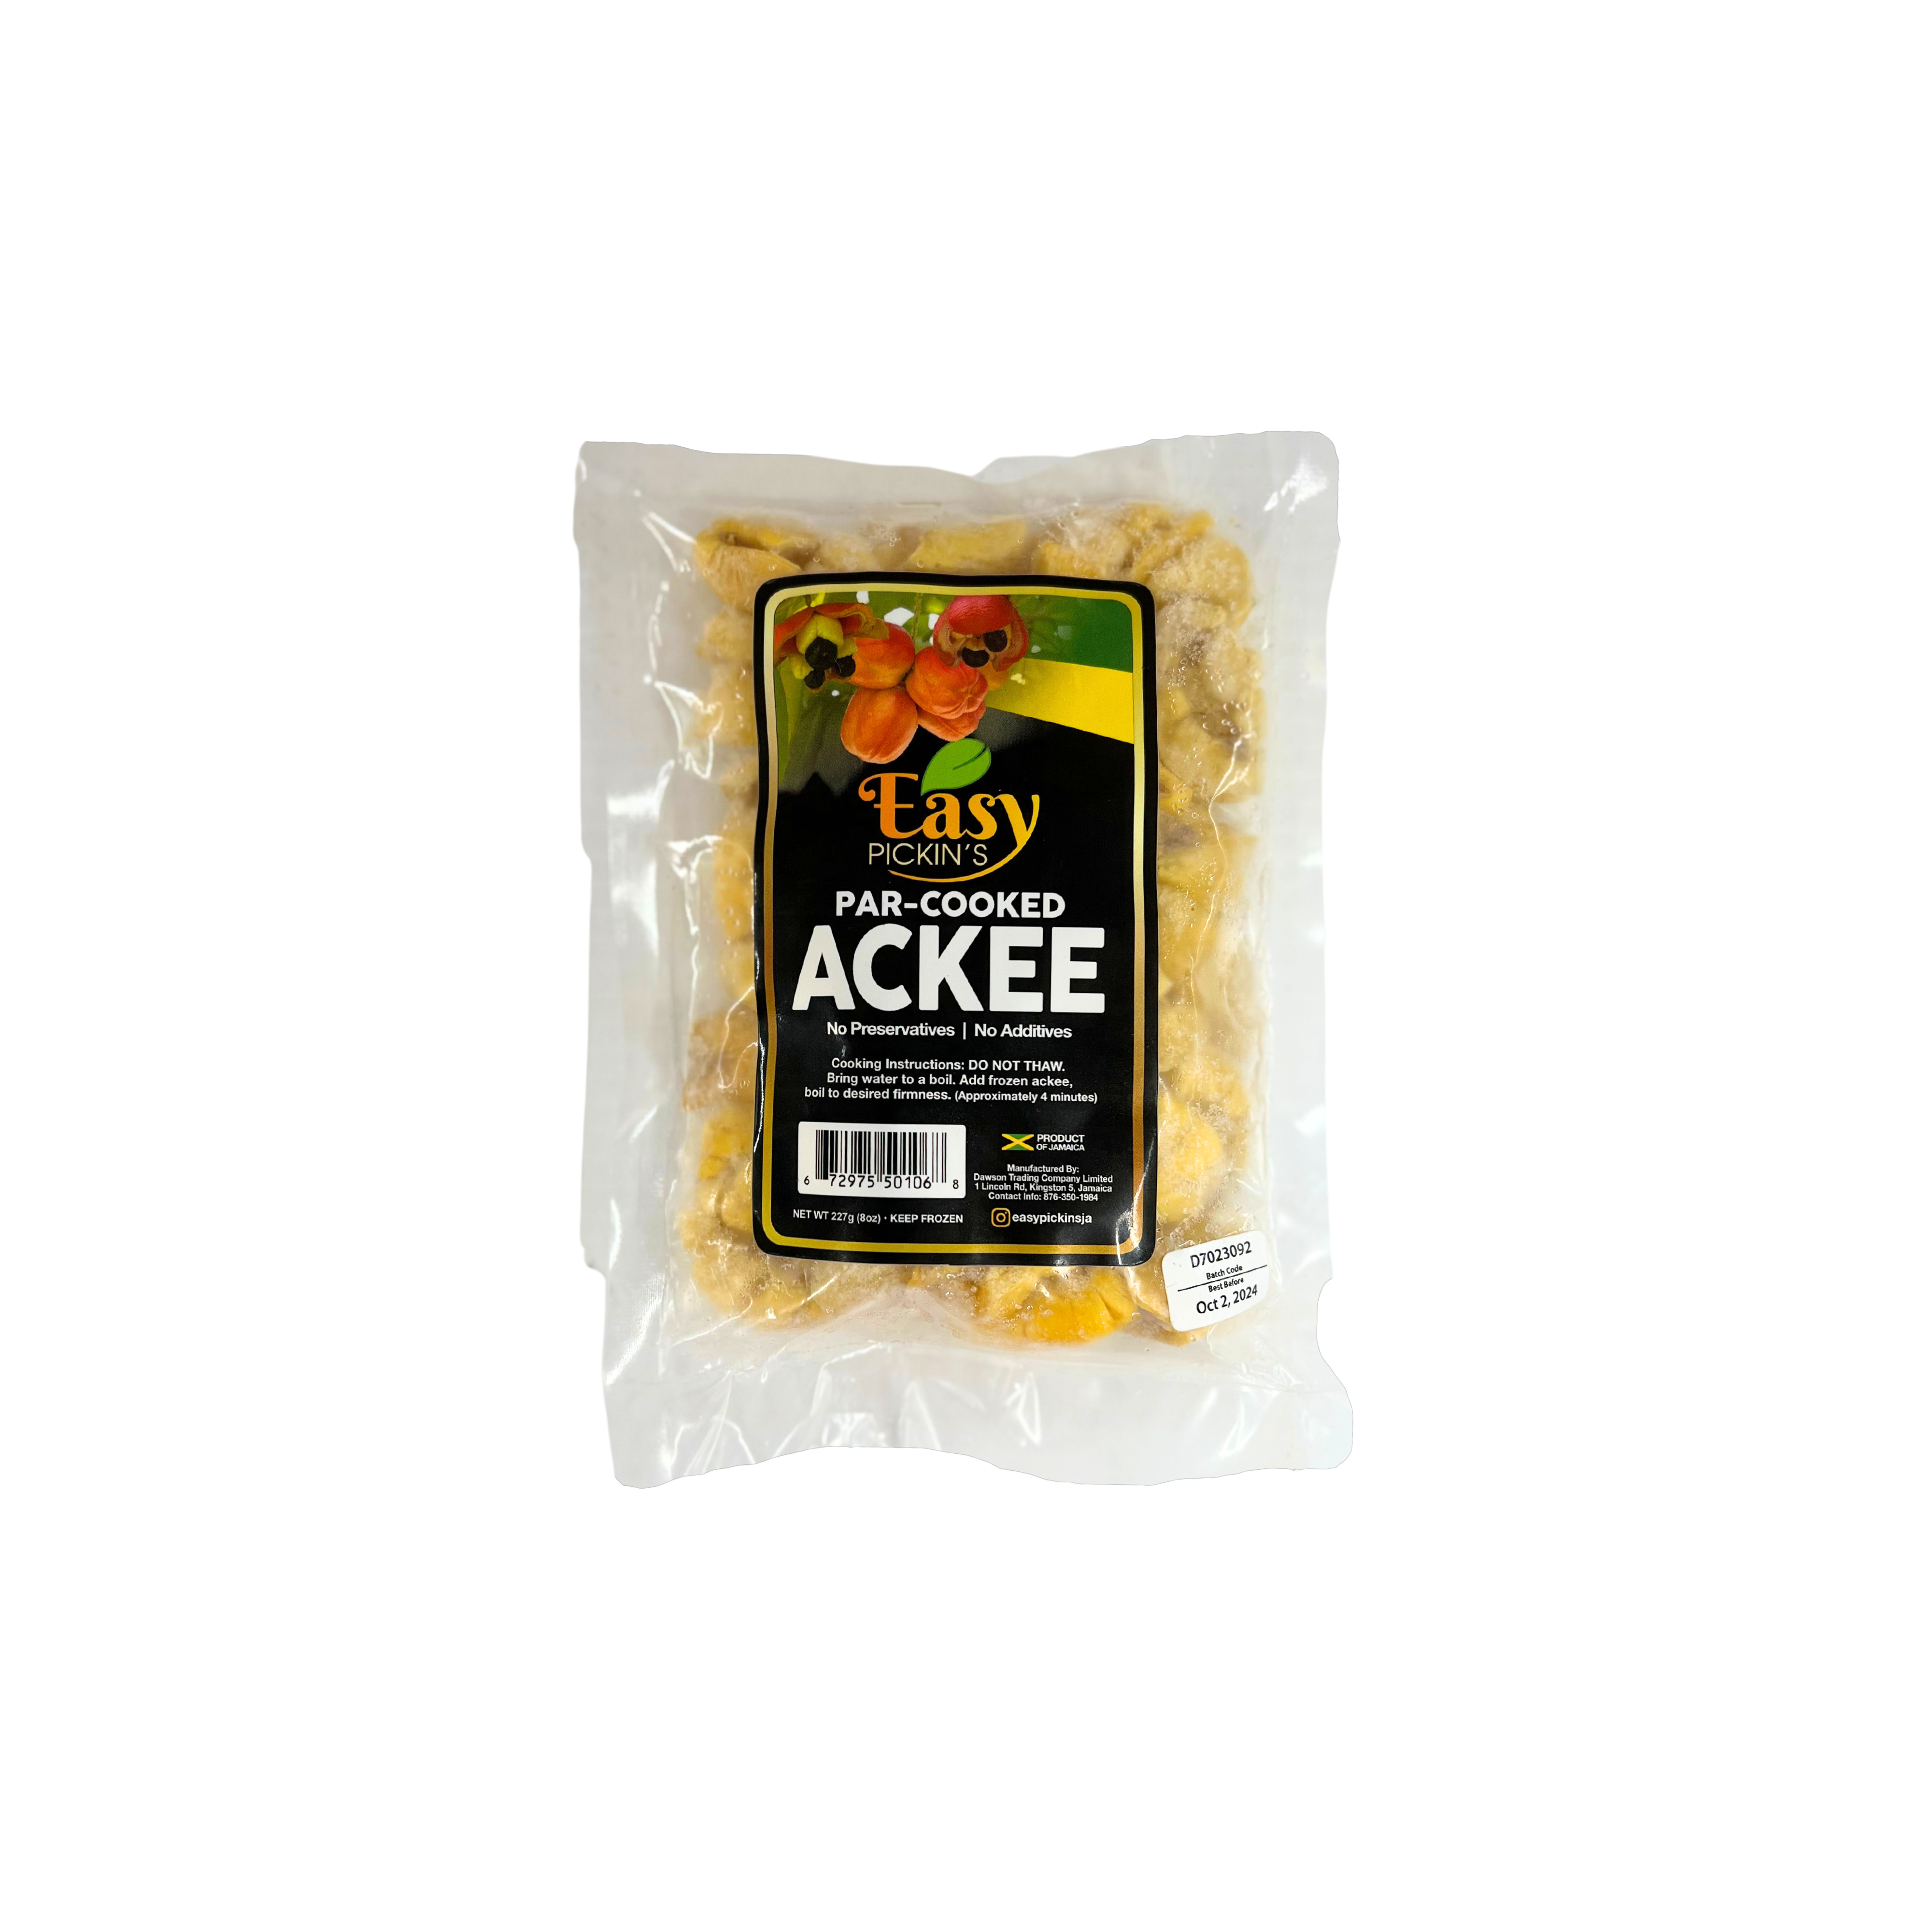 Easy Pickin's Par Cooked Ackee 227g